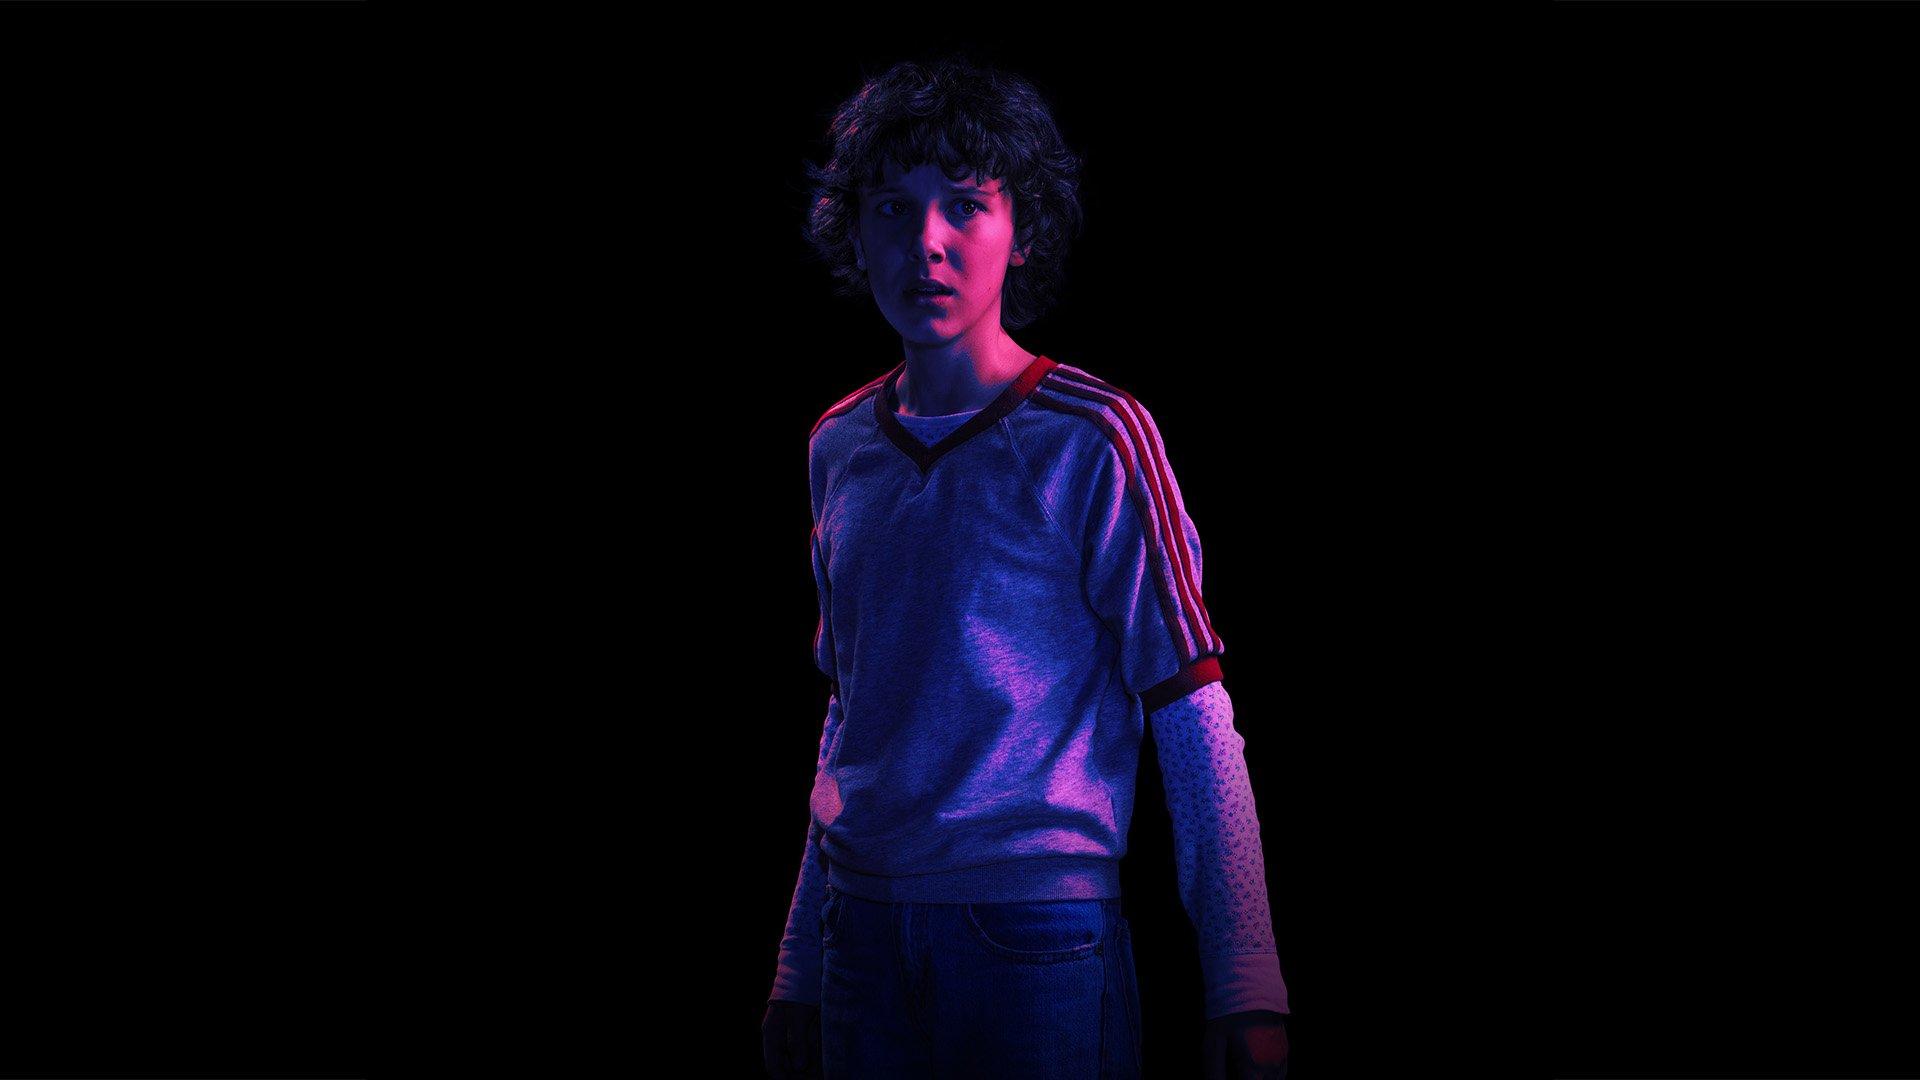 Stranger Things HD Wallpaper and Background Image